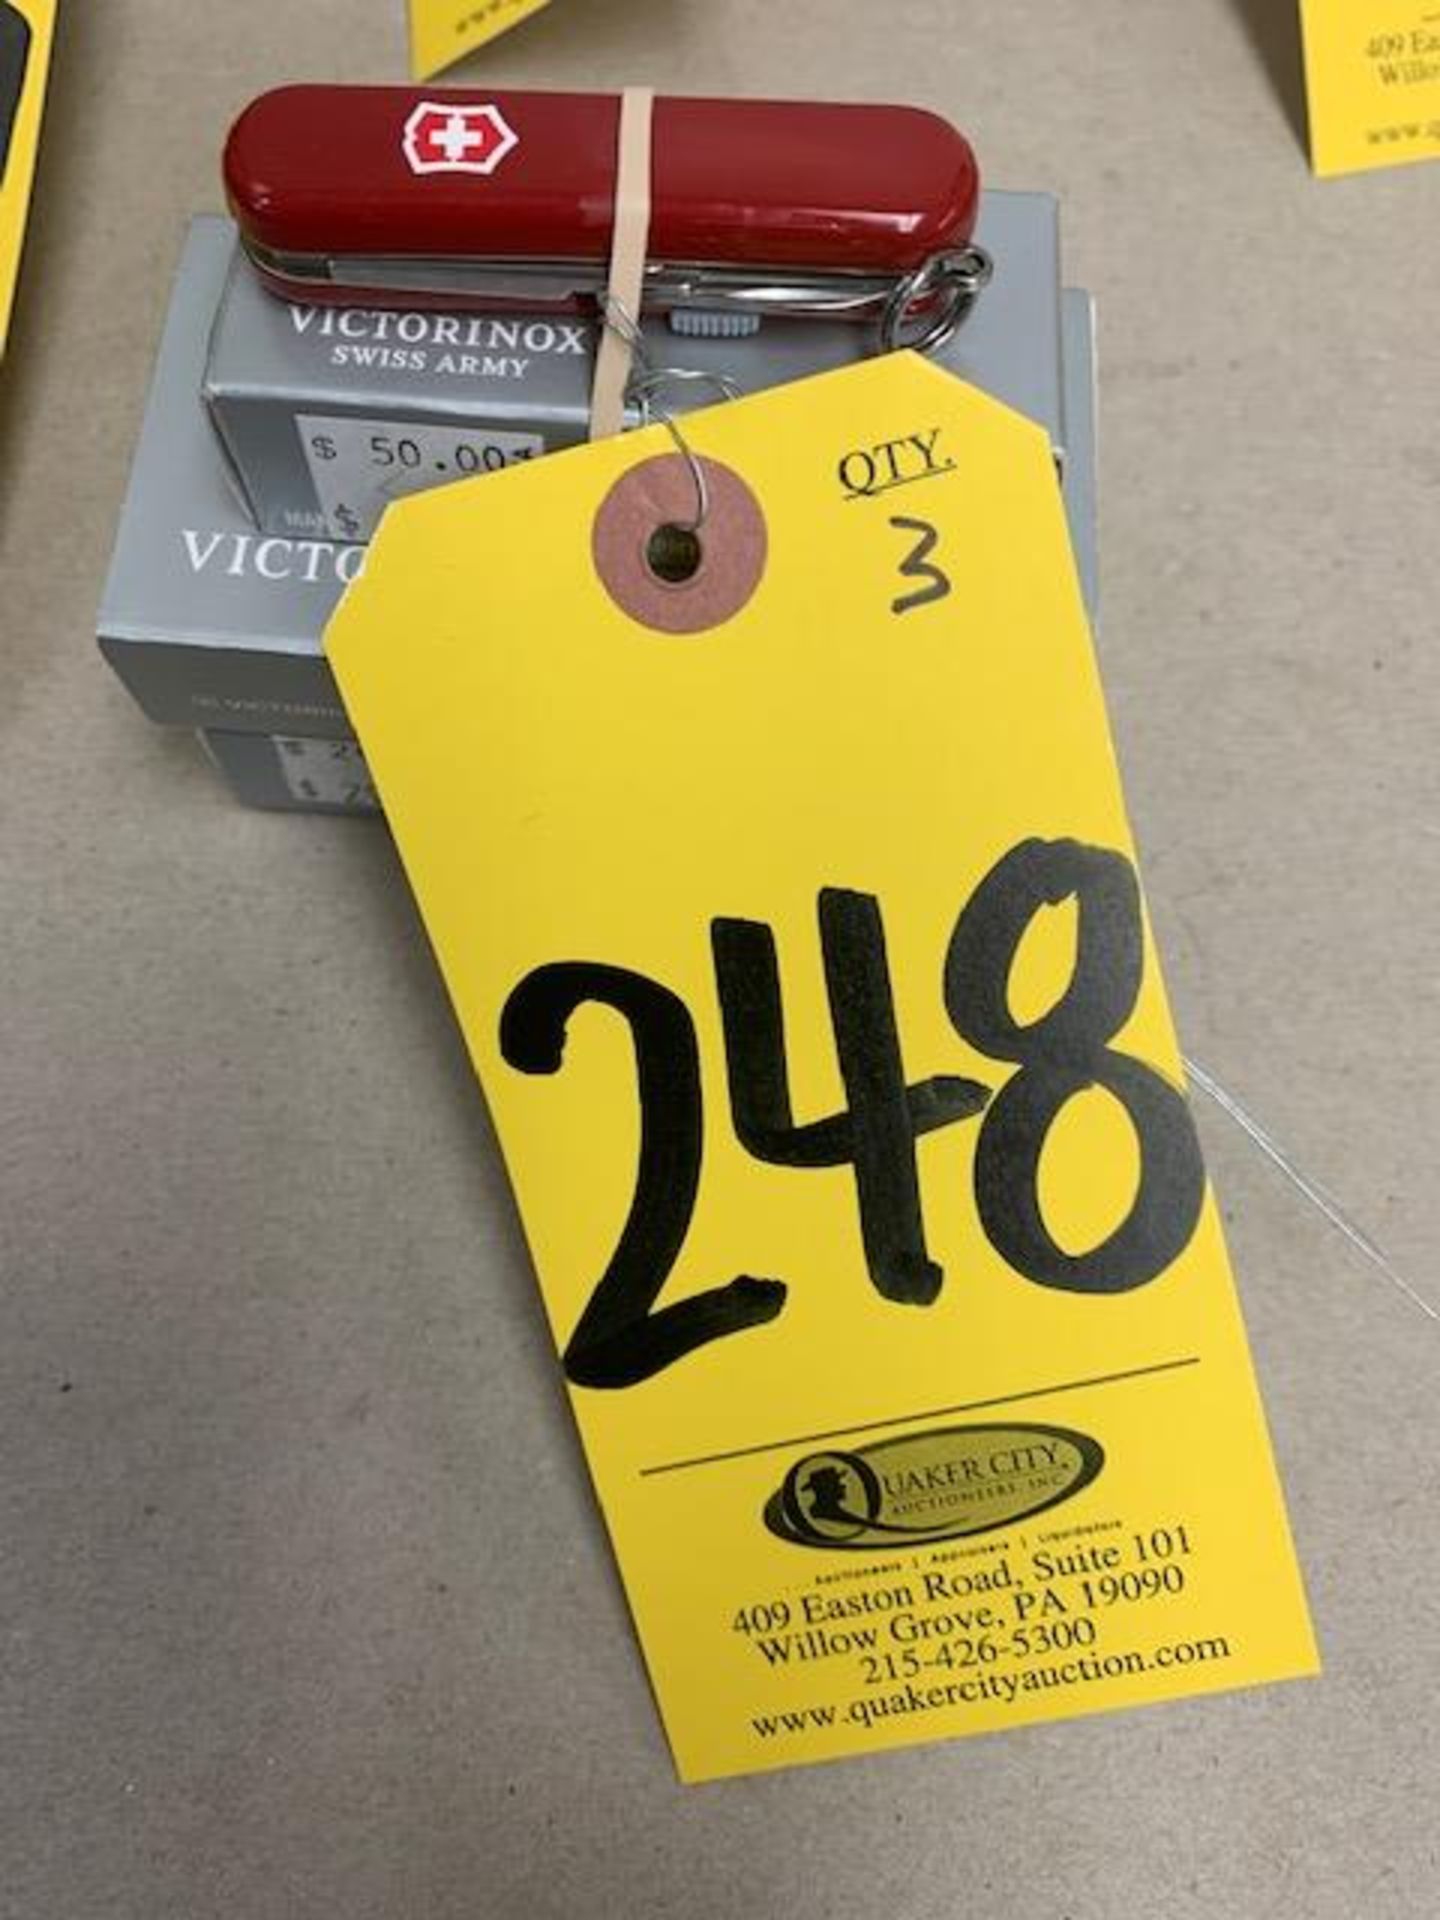 NEW (3) VICTORINOX 53186 AND 54197 SIGNATURE LIGHT RED KNIVES WITH LIGHTS (Retail Listing - $50/each